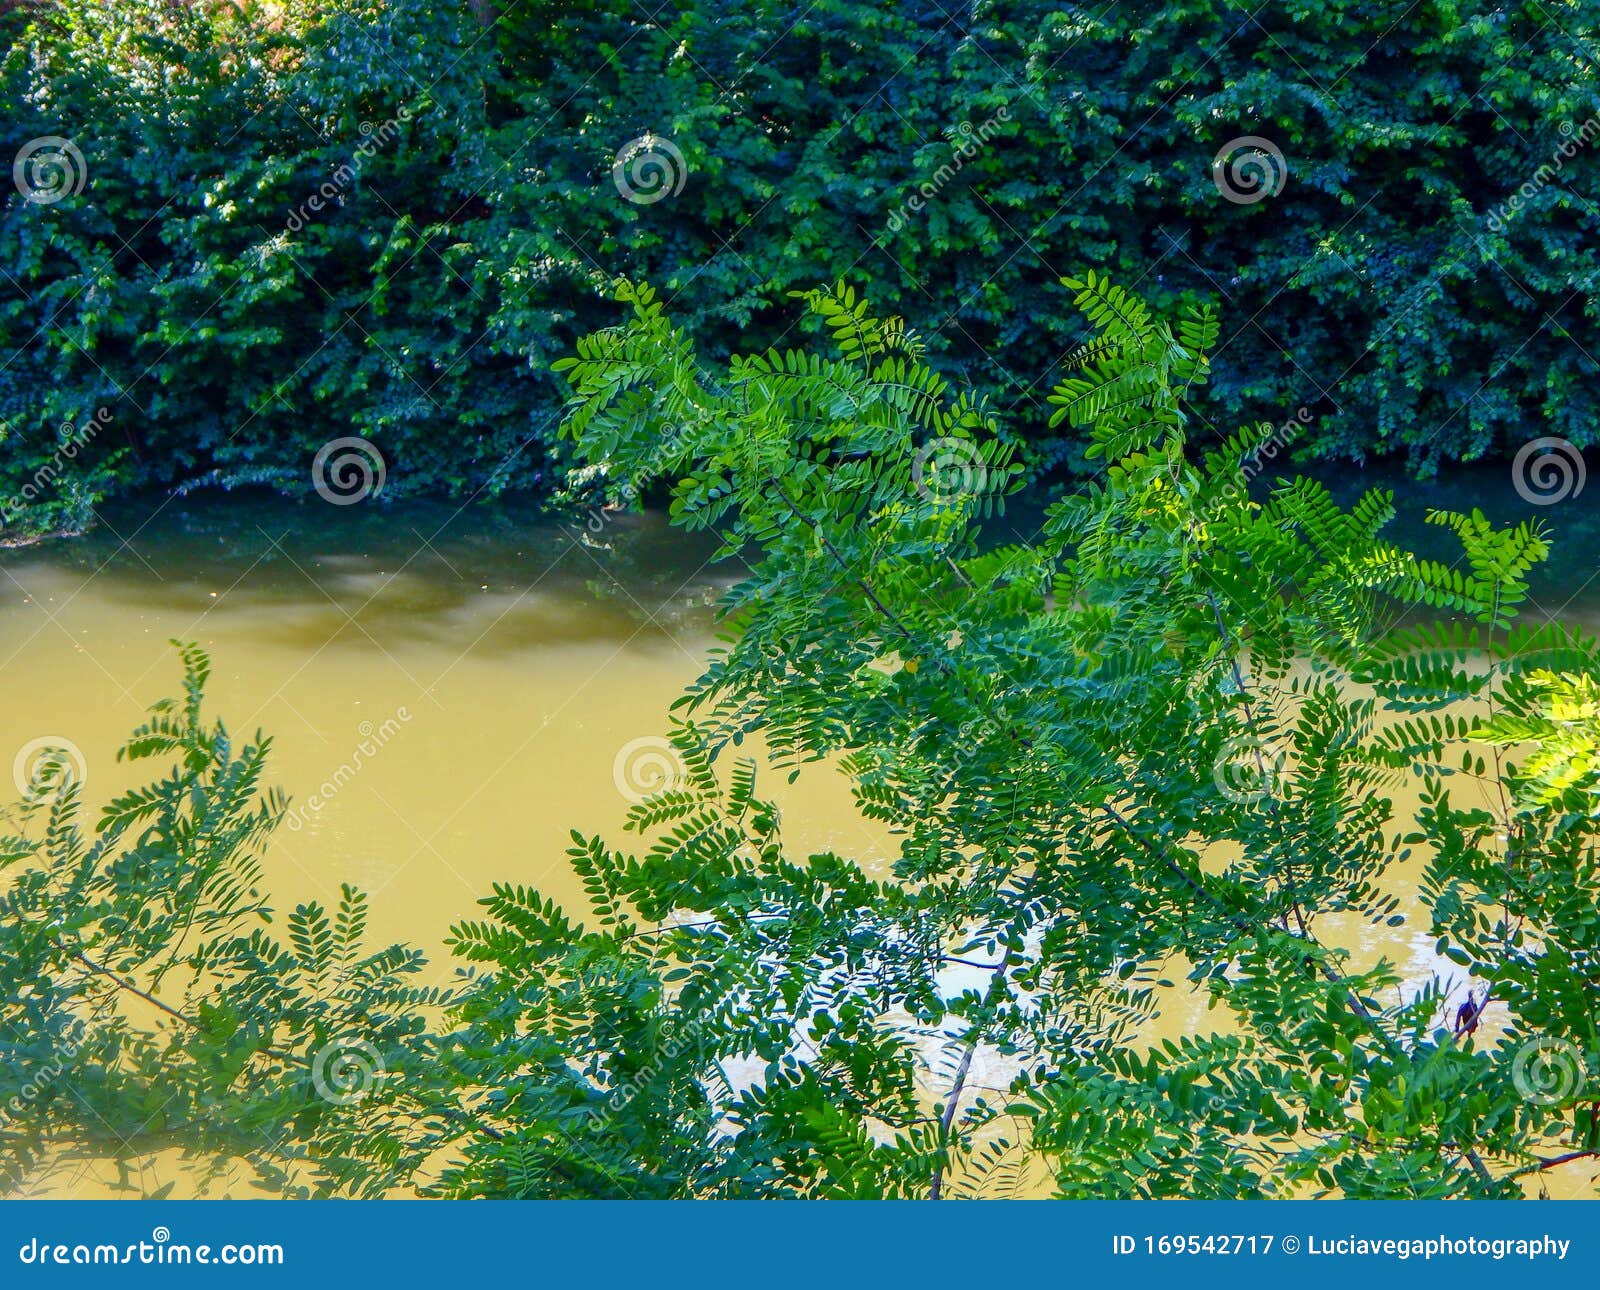 Opaque River and Green Tree Landscape Stock Image - Image of nature ...